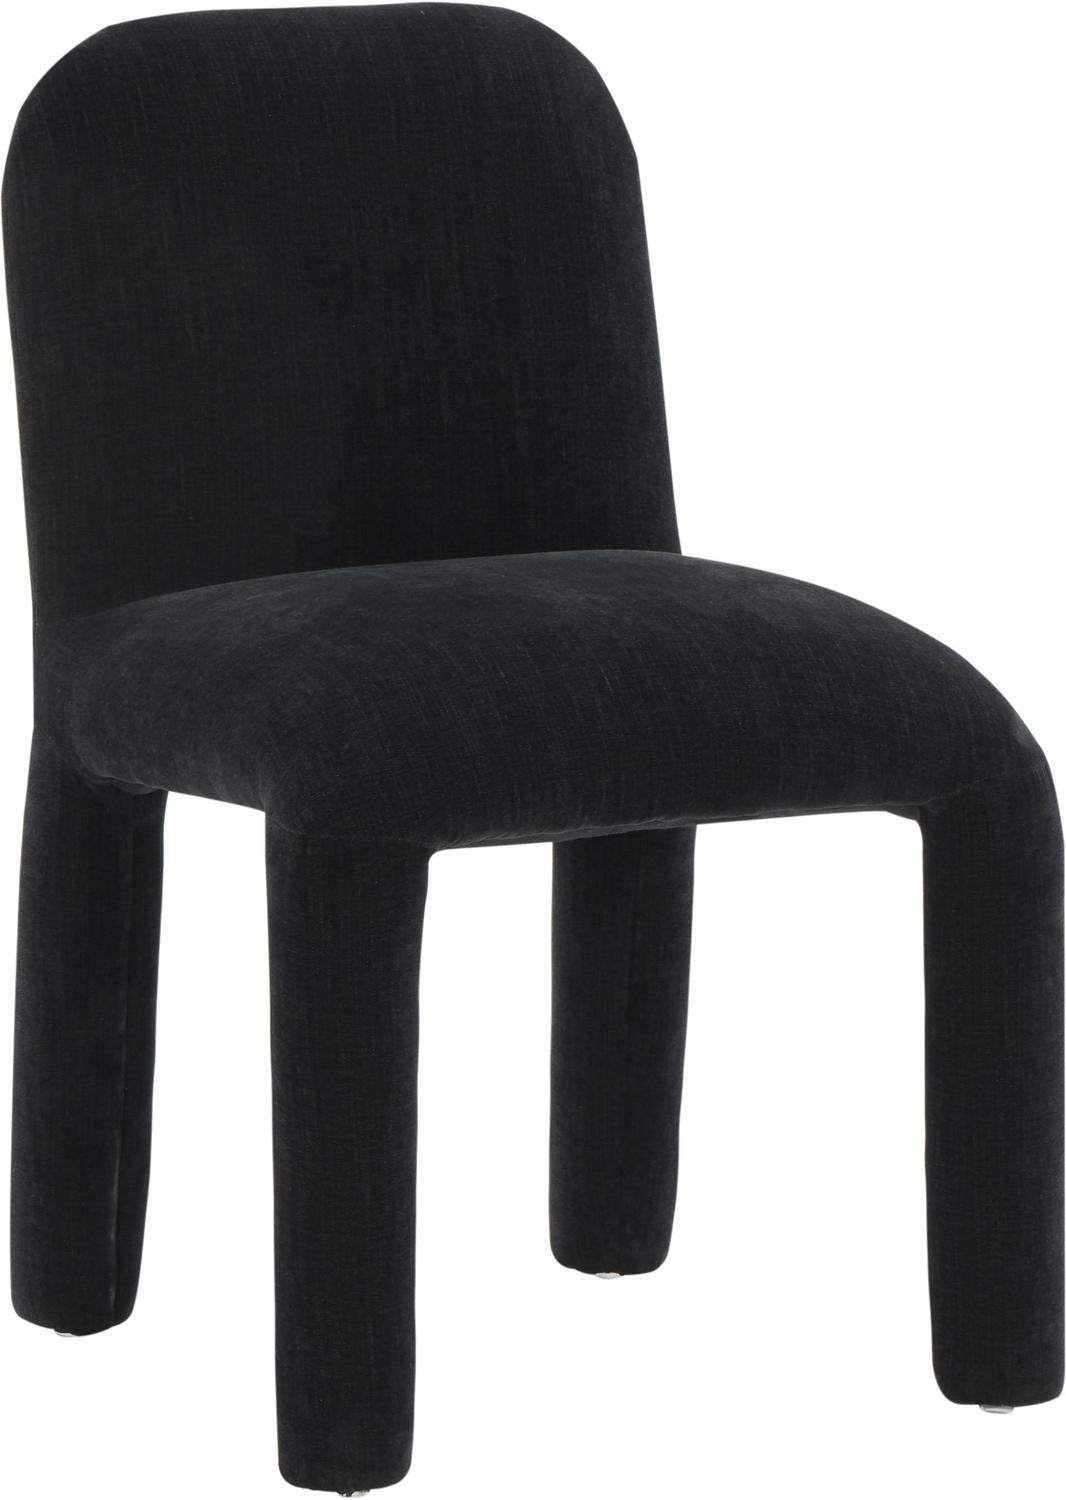 walnut dining chairs Tov Furniture Dining Chairs Black